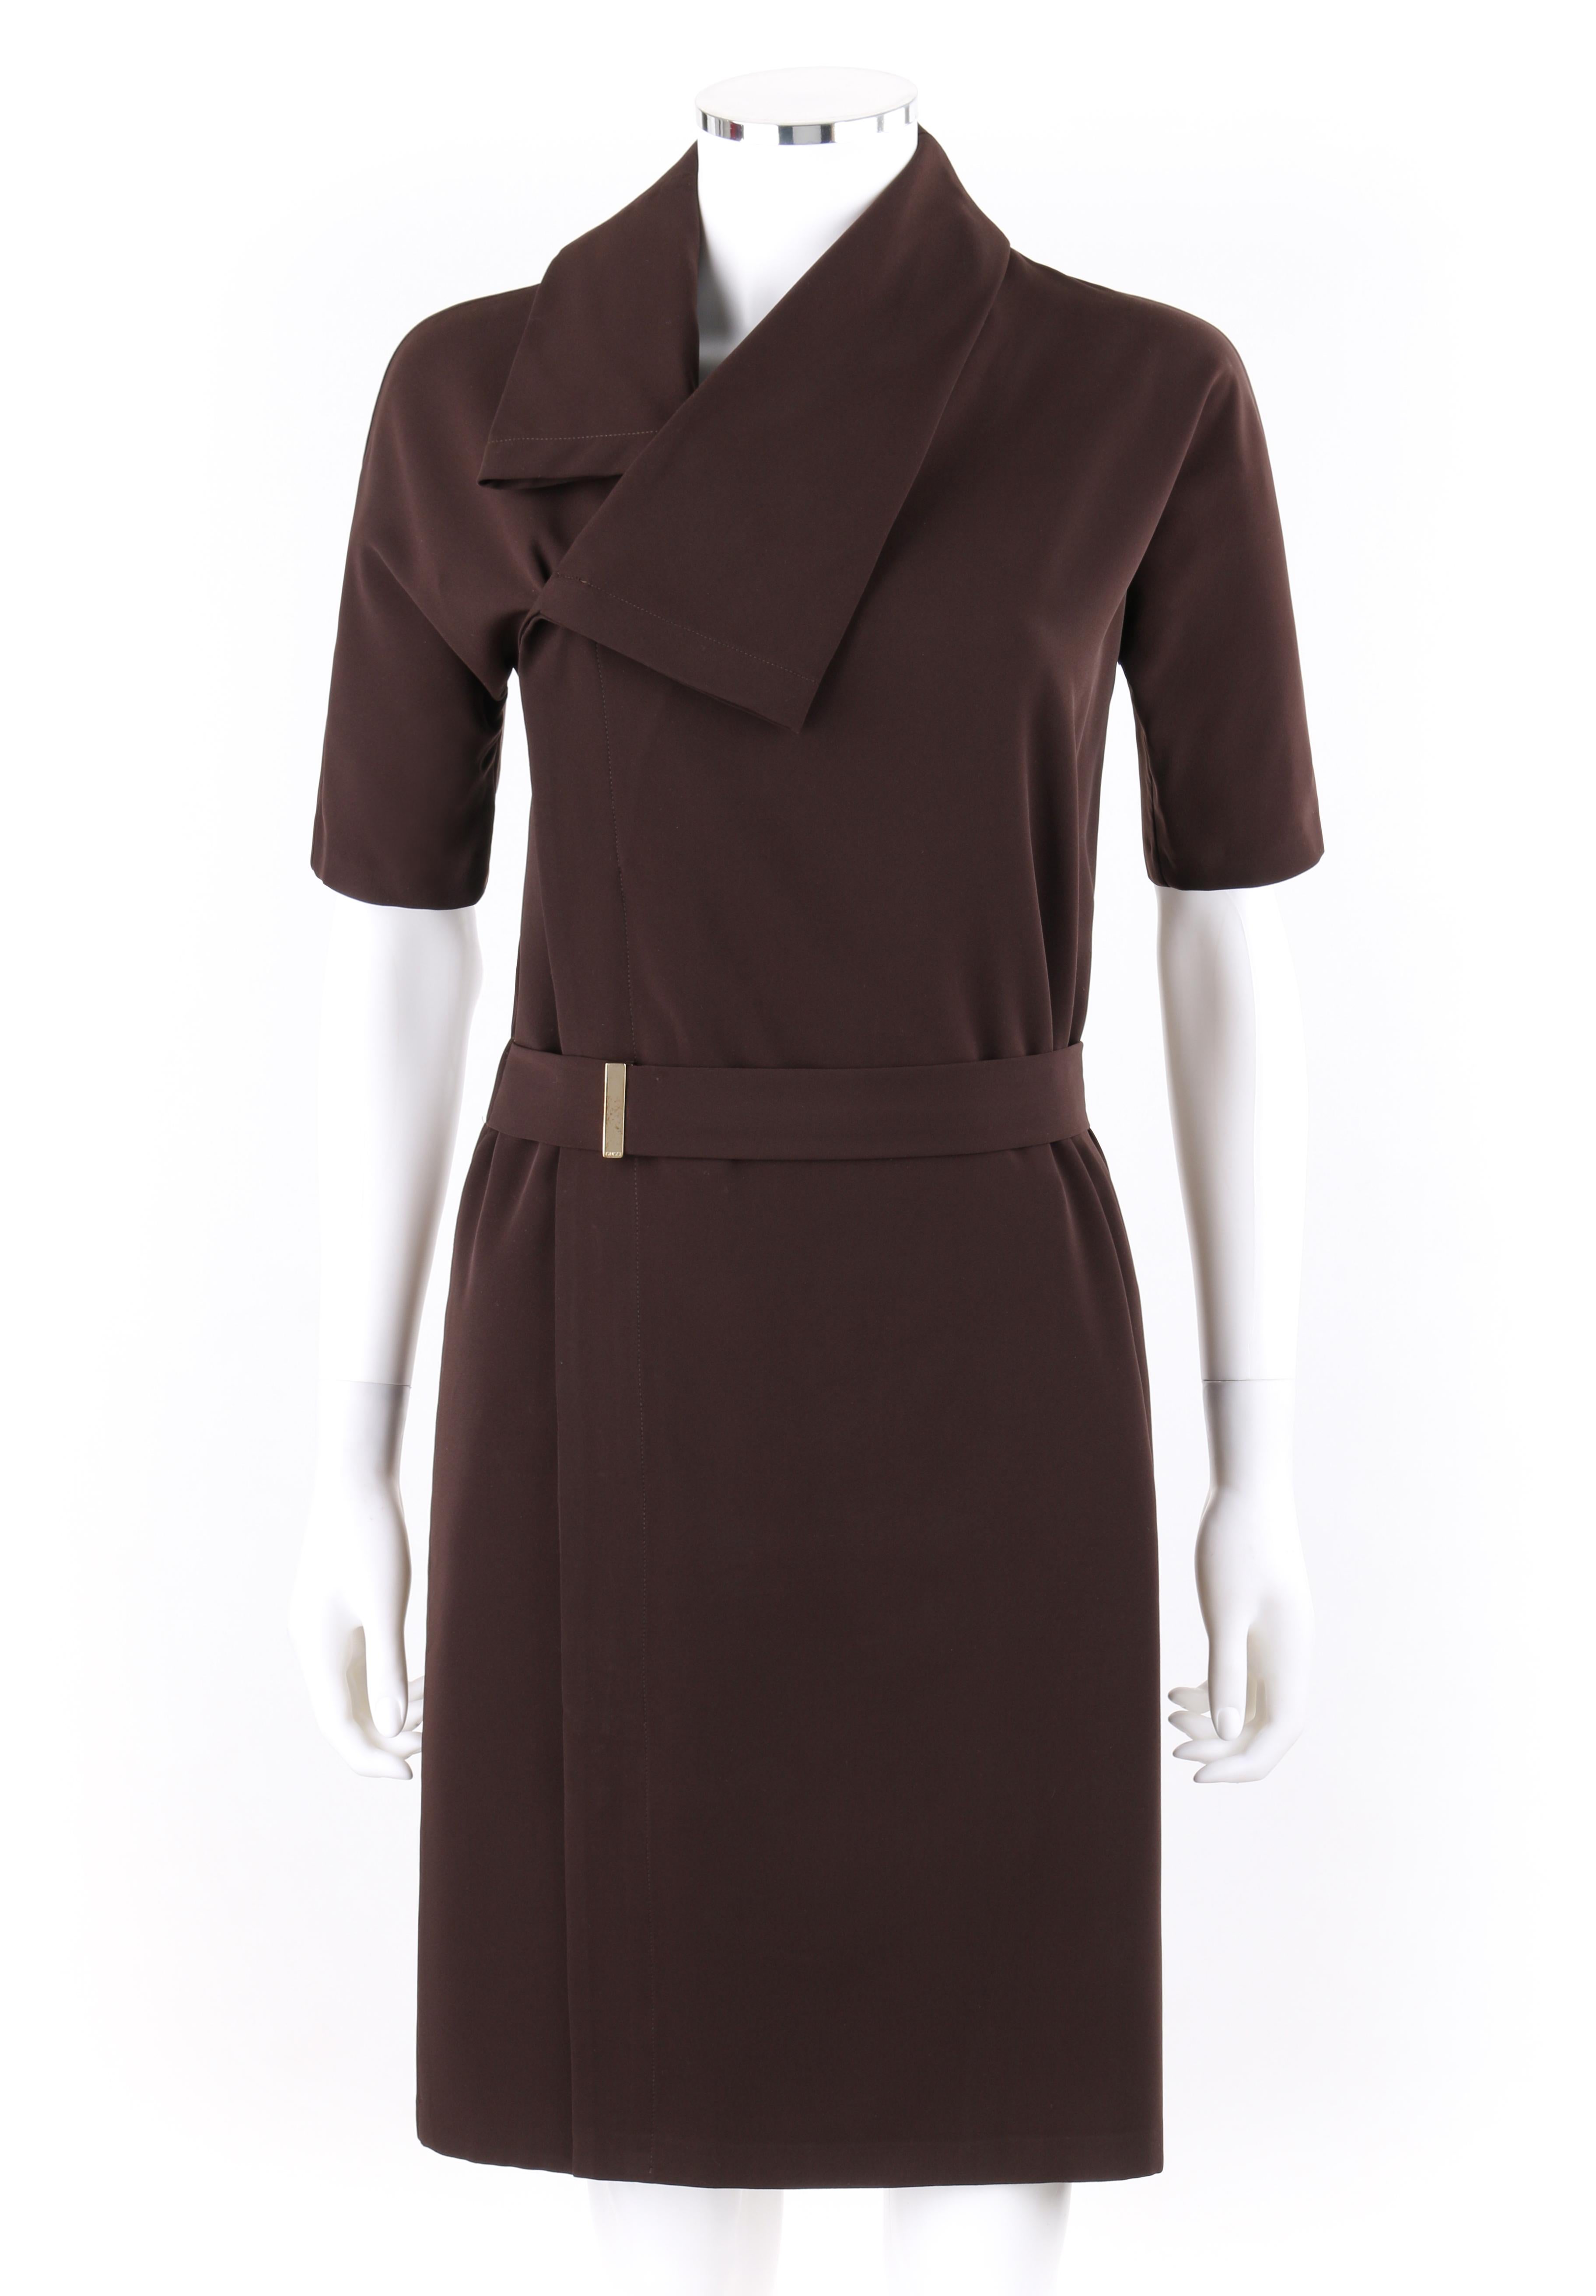 DESCRIPTION: GUCCI A/W 2010 Brown Dolman Sleeve Belted Asymmetrical Shift Cocktail Dress
 
Brand / Manufacturer: Gucci
Designer: Frida Giannini
Style: Asymmetrical shift dress
Color(s): Brown
Lined: No
Marked Fabric Content: 89% Polyester, 11%